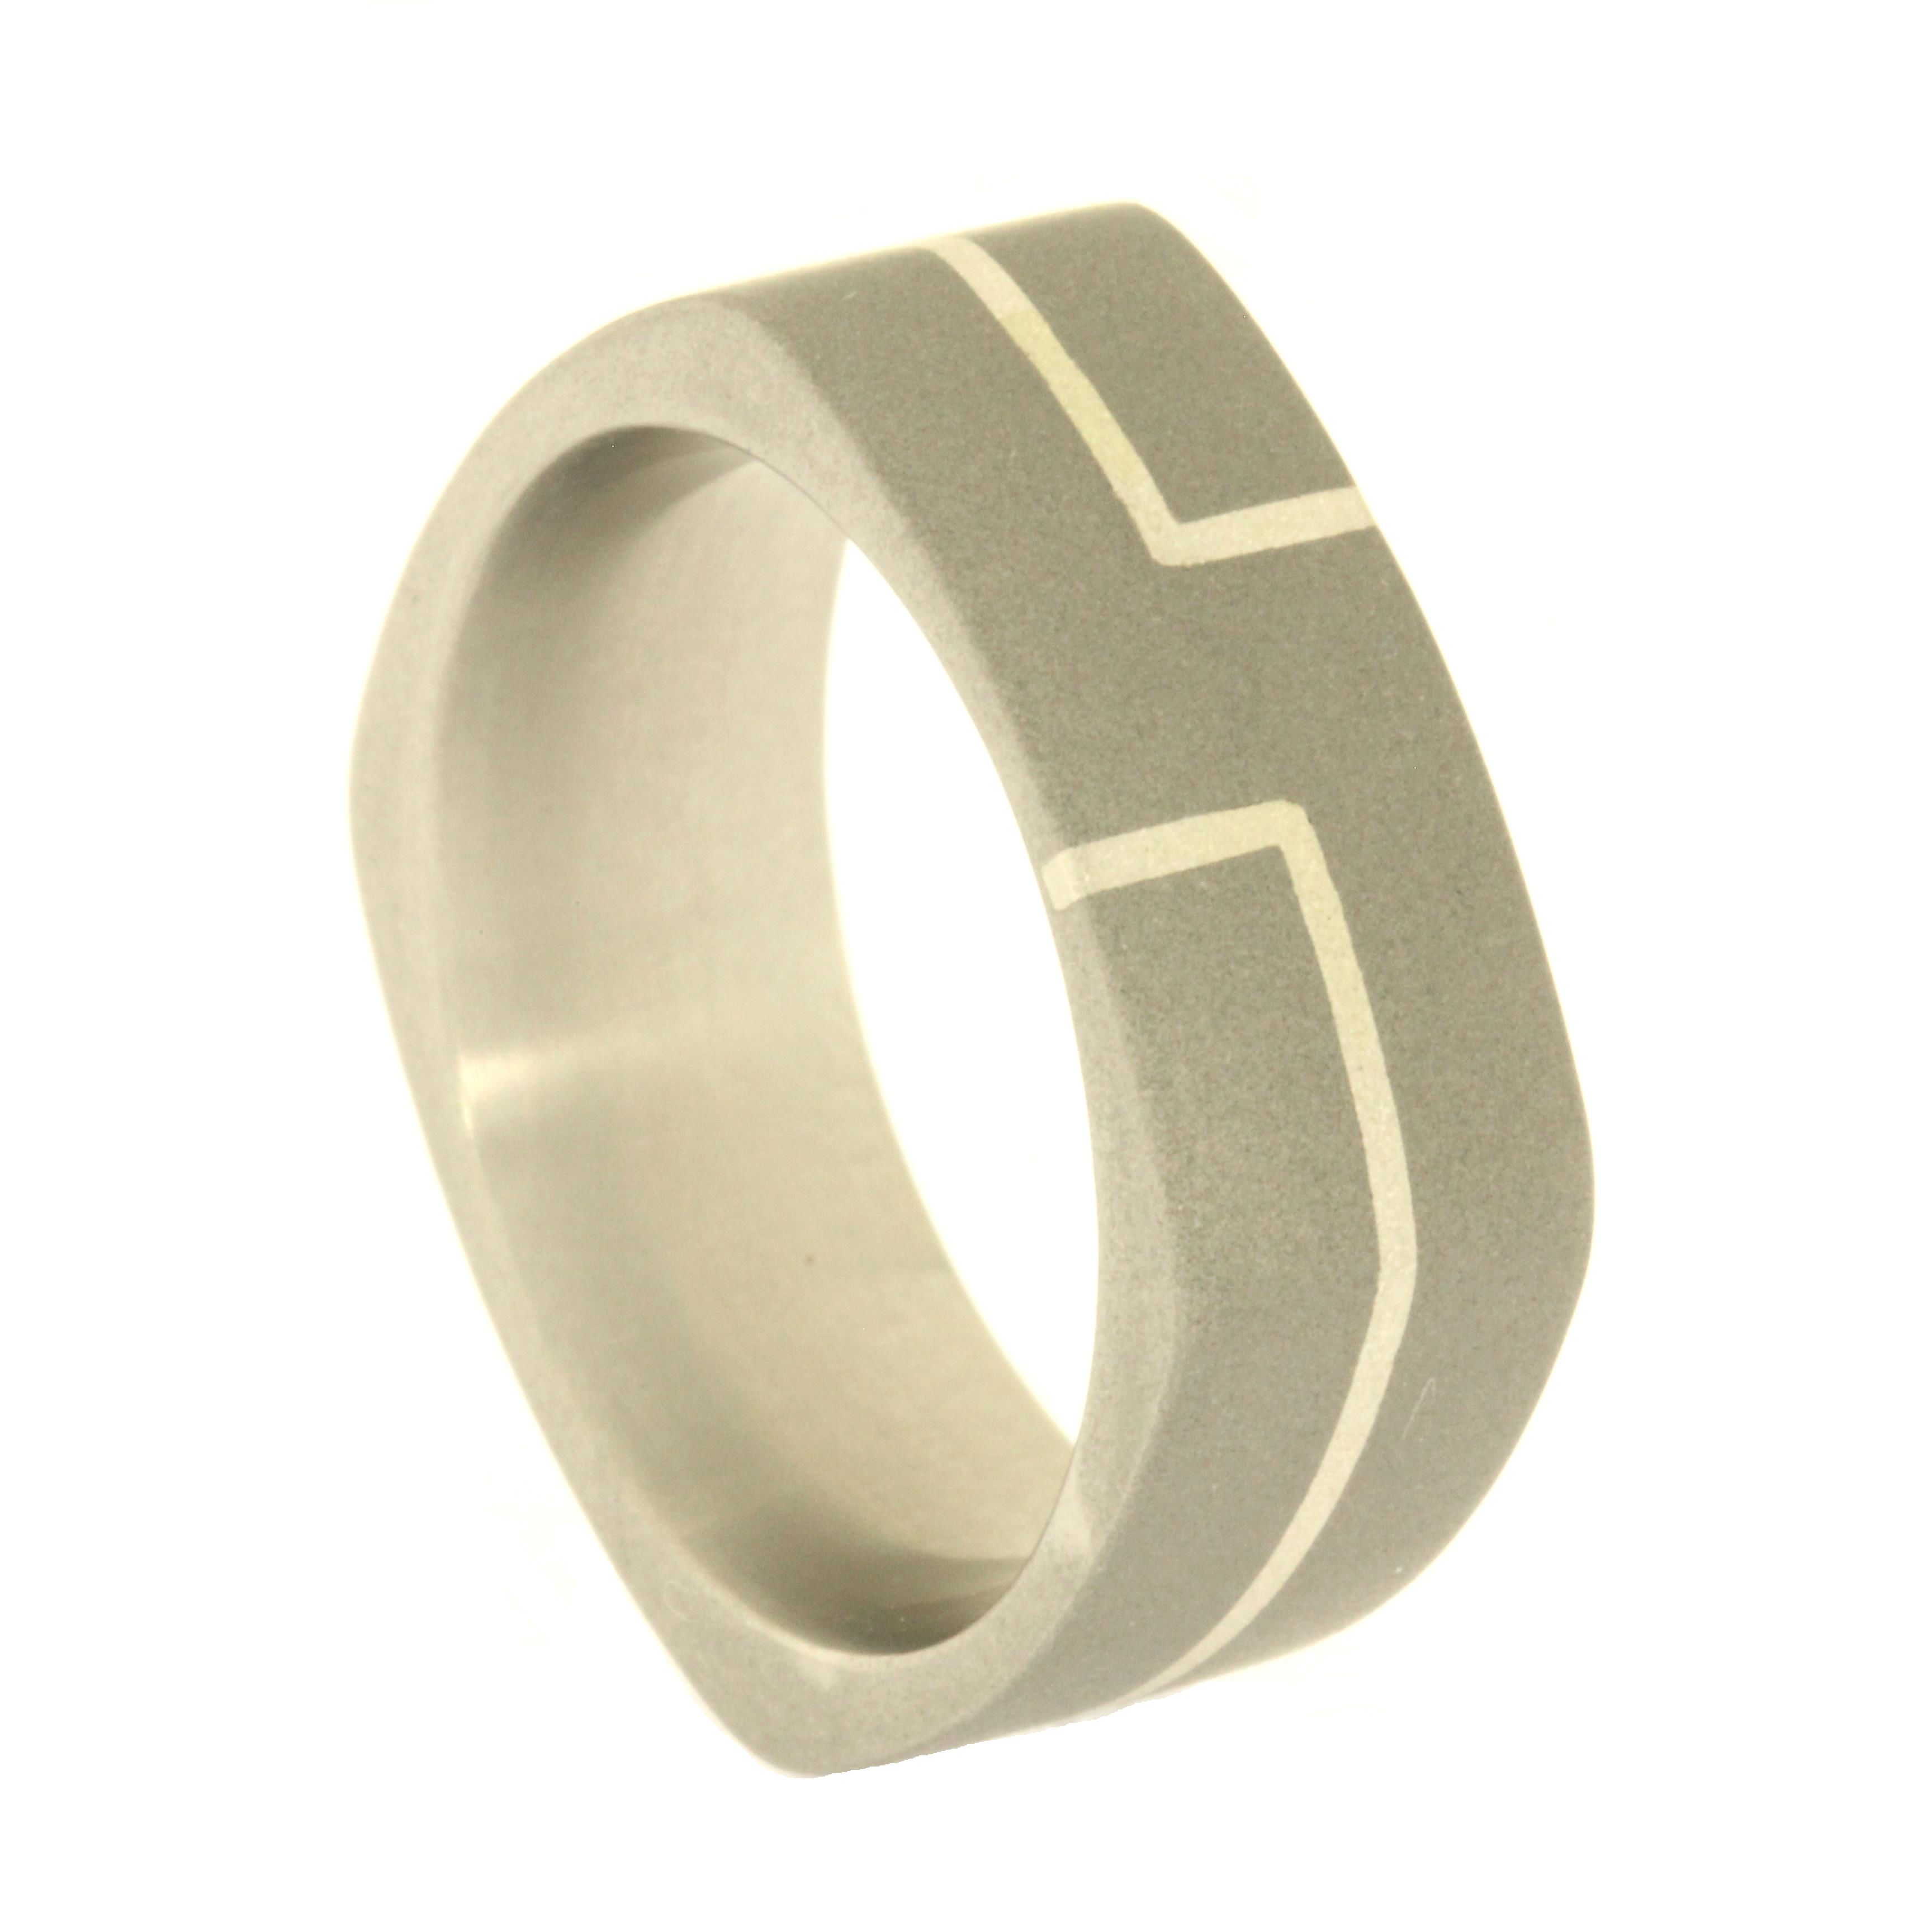 Handmade square ring in sandblast titanium with a sterling silver graphic design inlay; handmade especially for you.